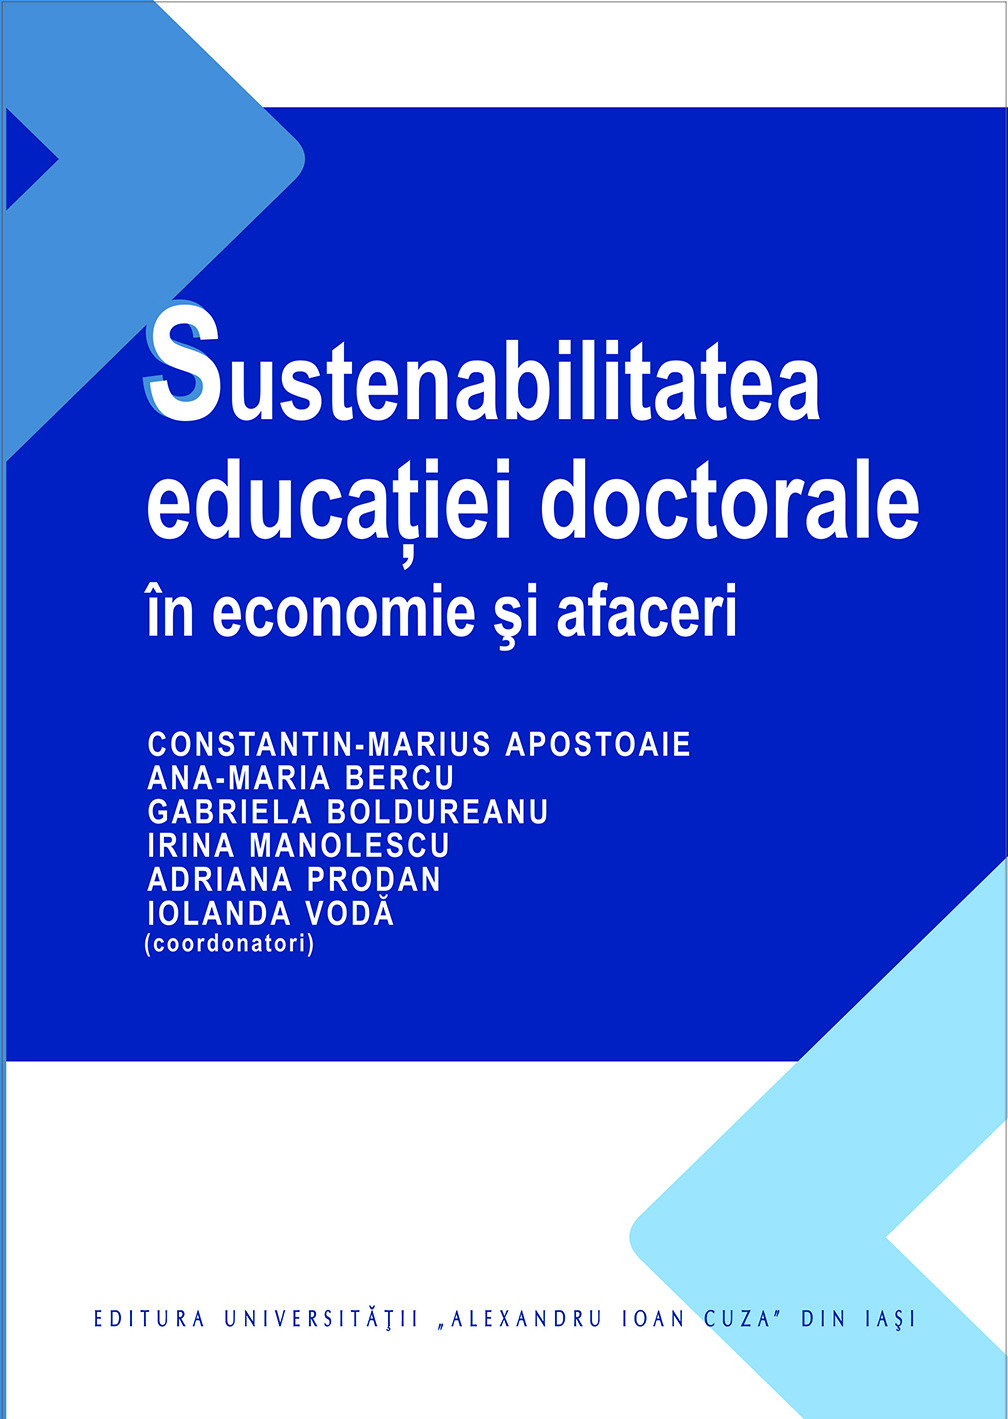 Sustainability of doctoral education in economics and business.